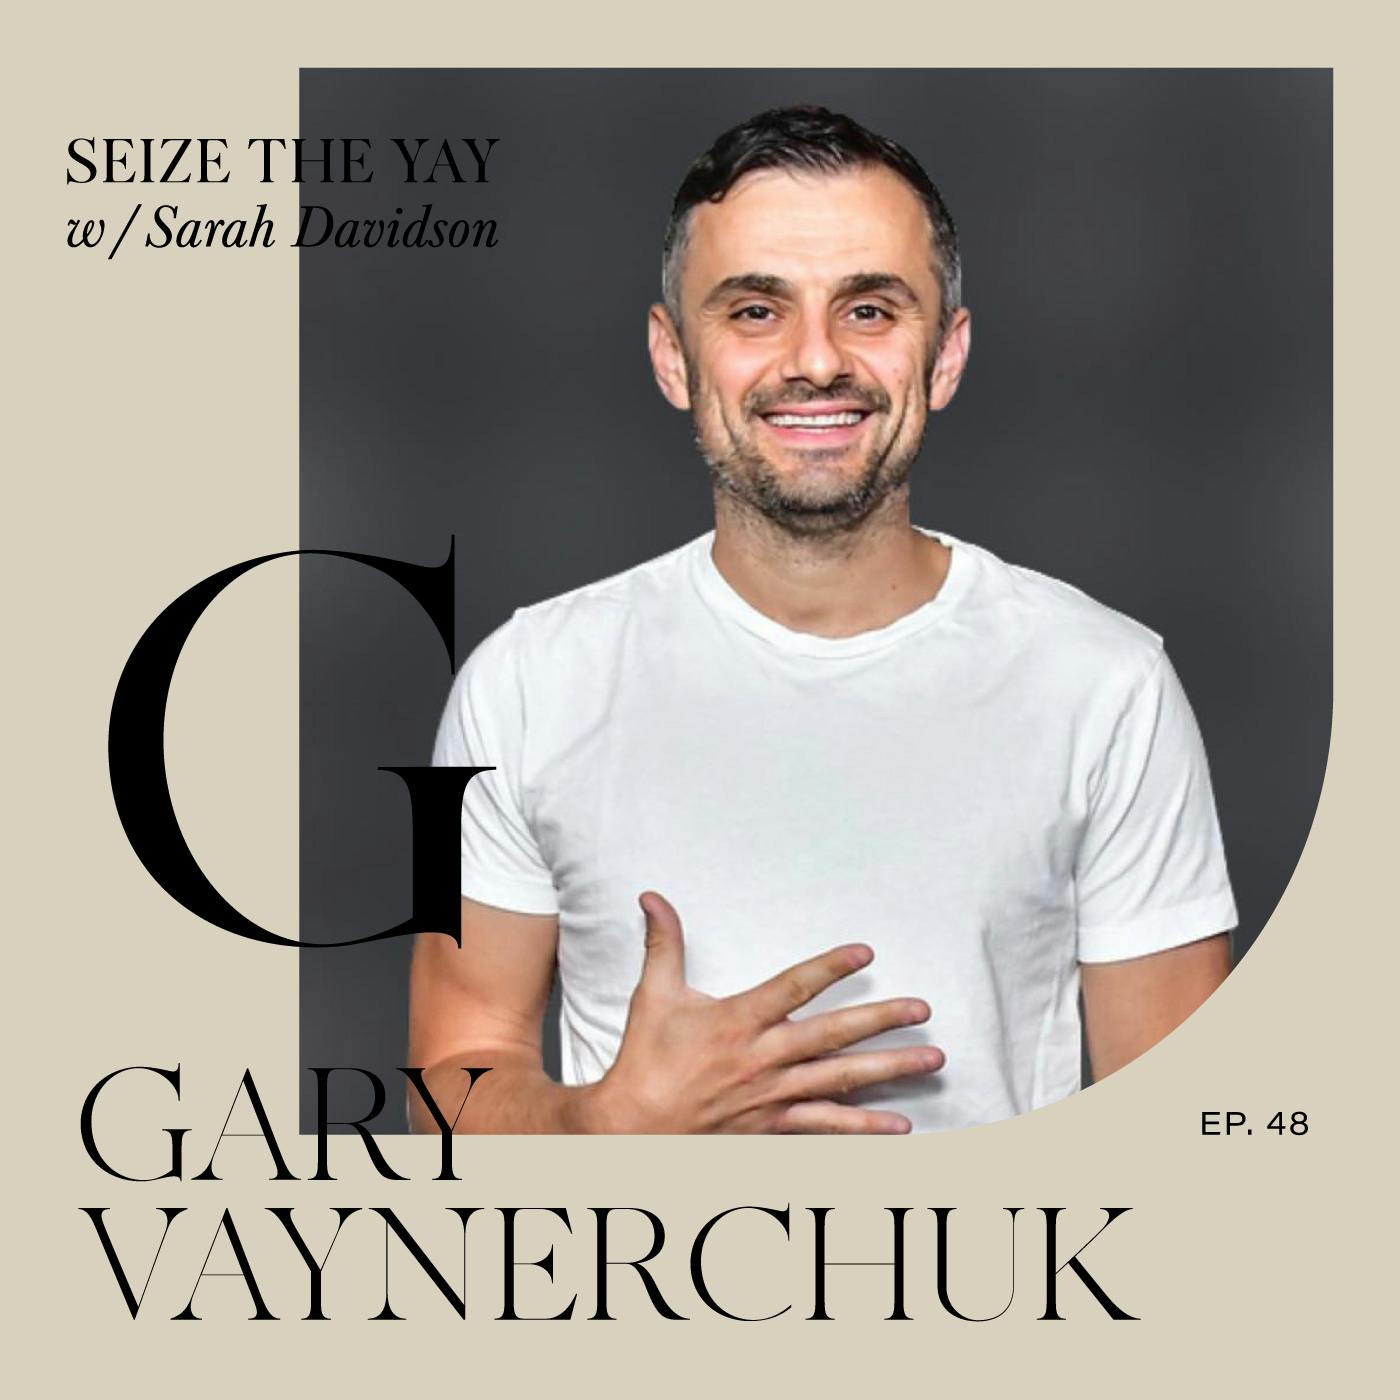 Gary Vee // The Vaynerchuking legend **RE-RELEASE**